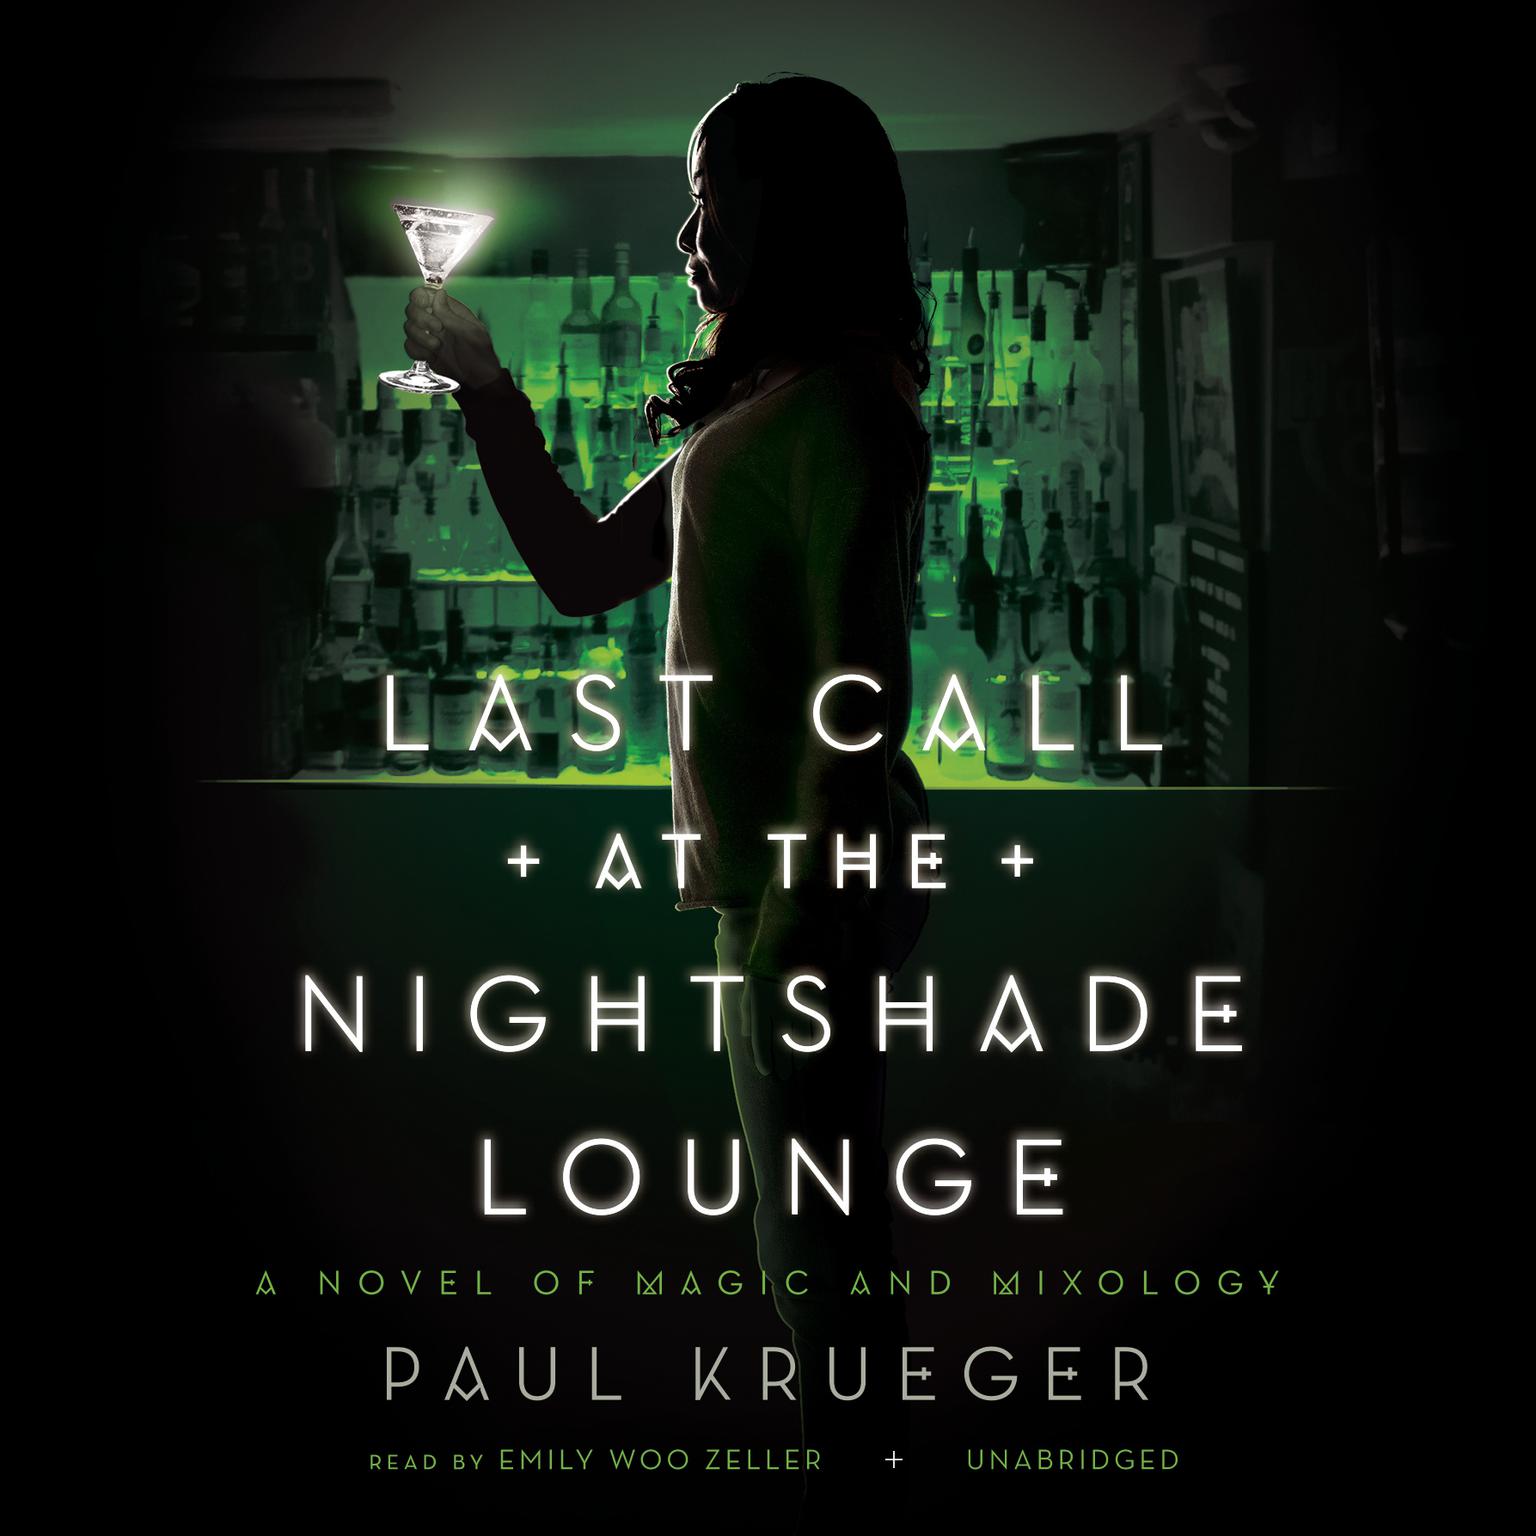 Last Call at the Nightshade Lounge: A Novel of Magic and Mixology Audiobook, by Paul Krueger